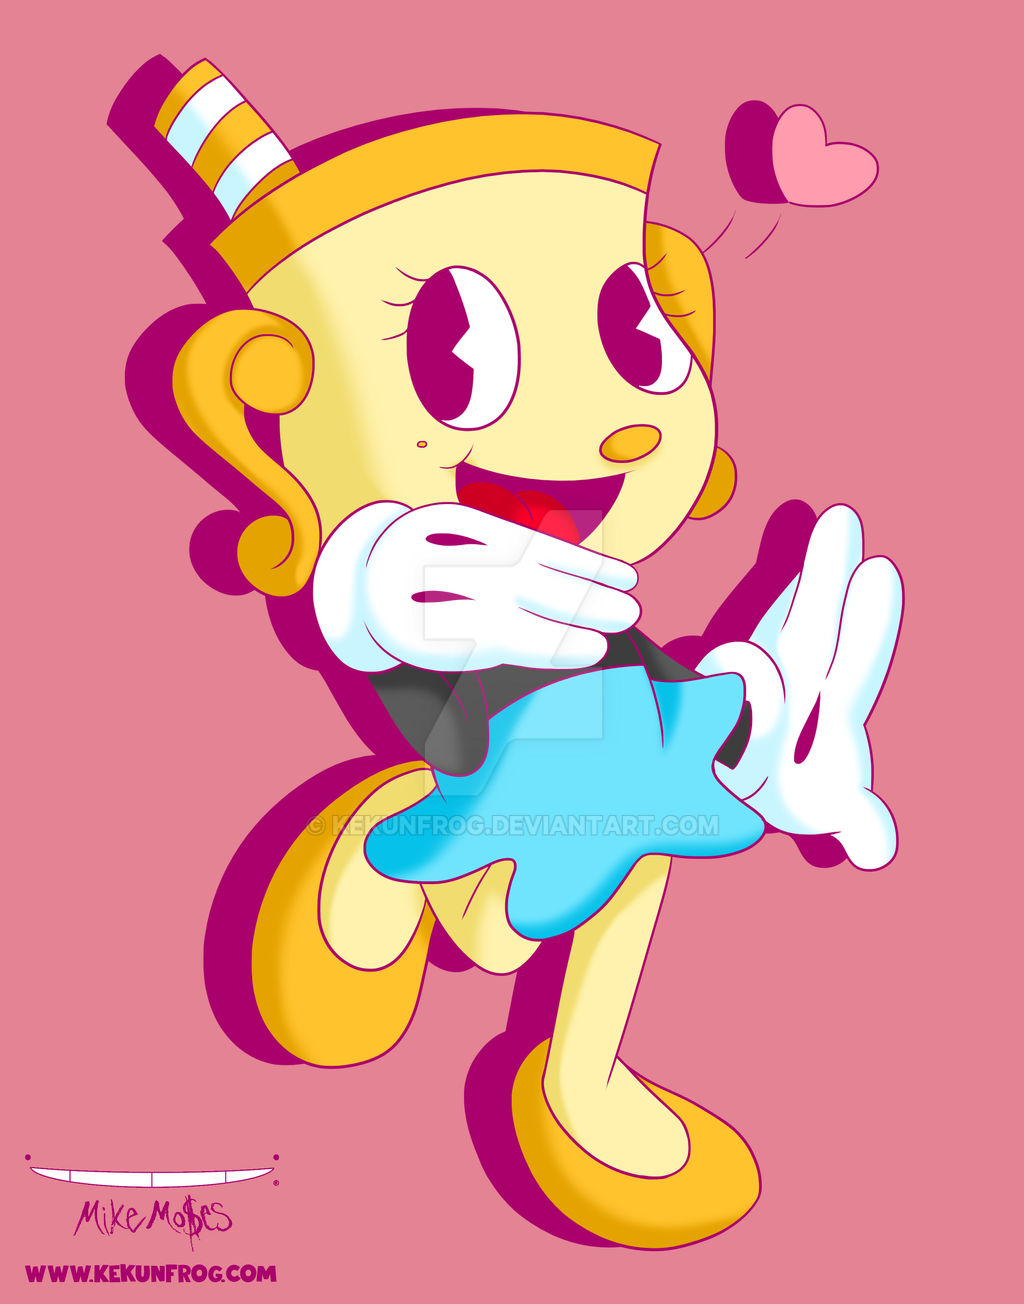 Cuphead Show Ms. Chalice by ArgenInk on DeviantArt